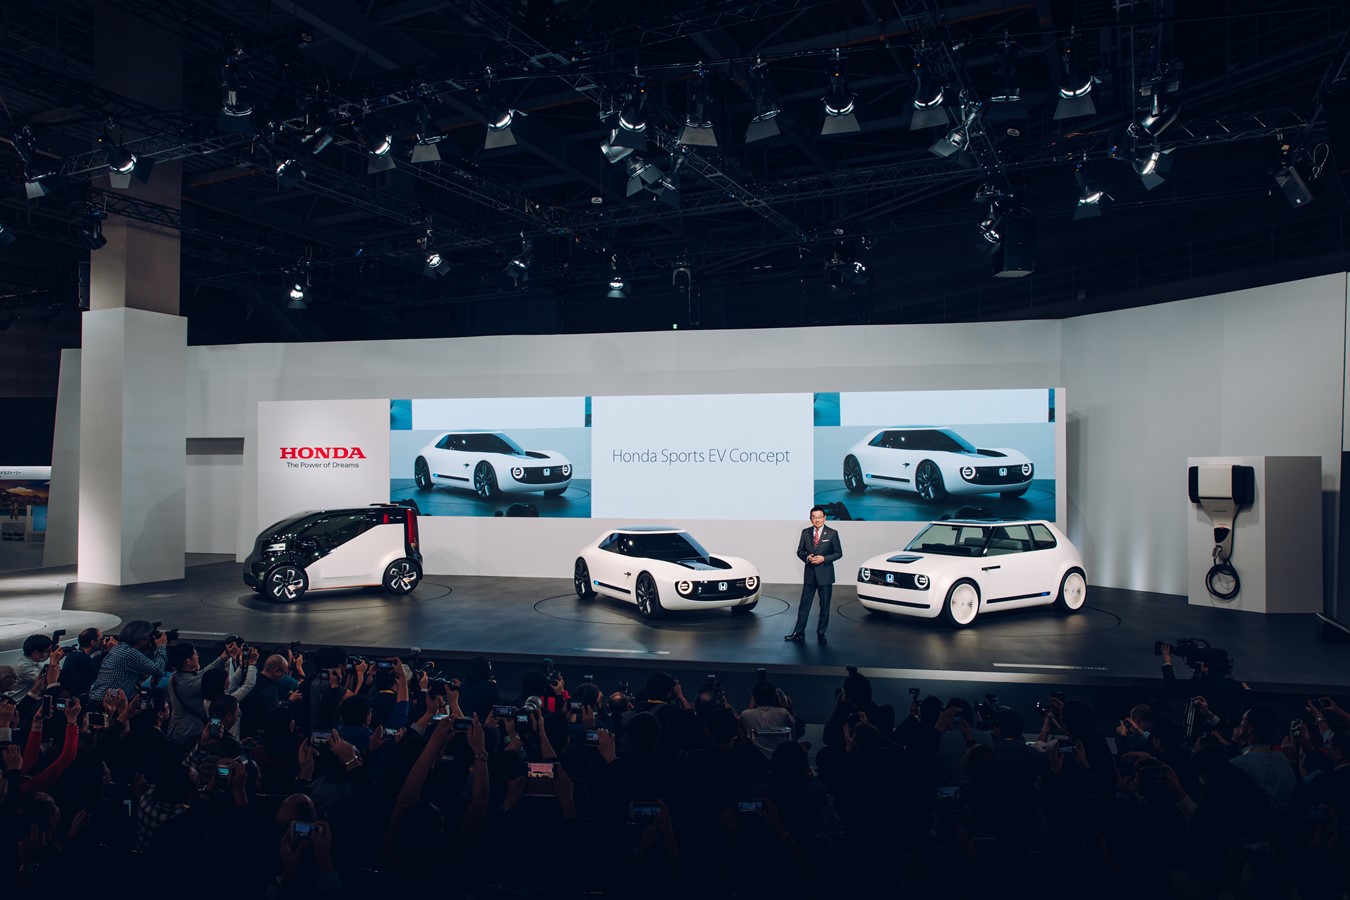 Summary of Honda Announcements and Exhibits at the 45th Tokyo Motor Show